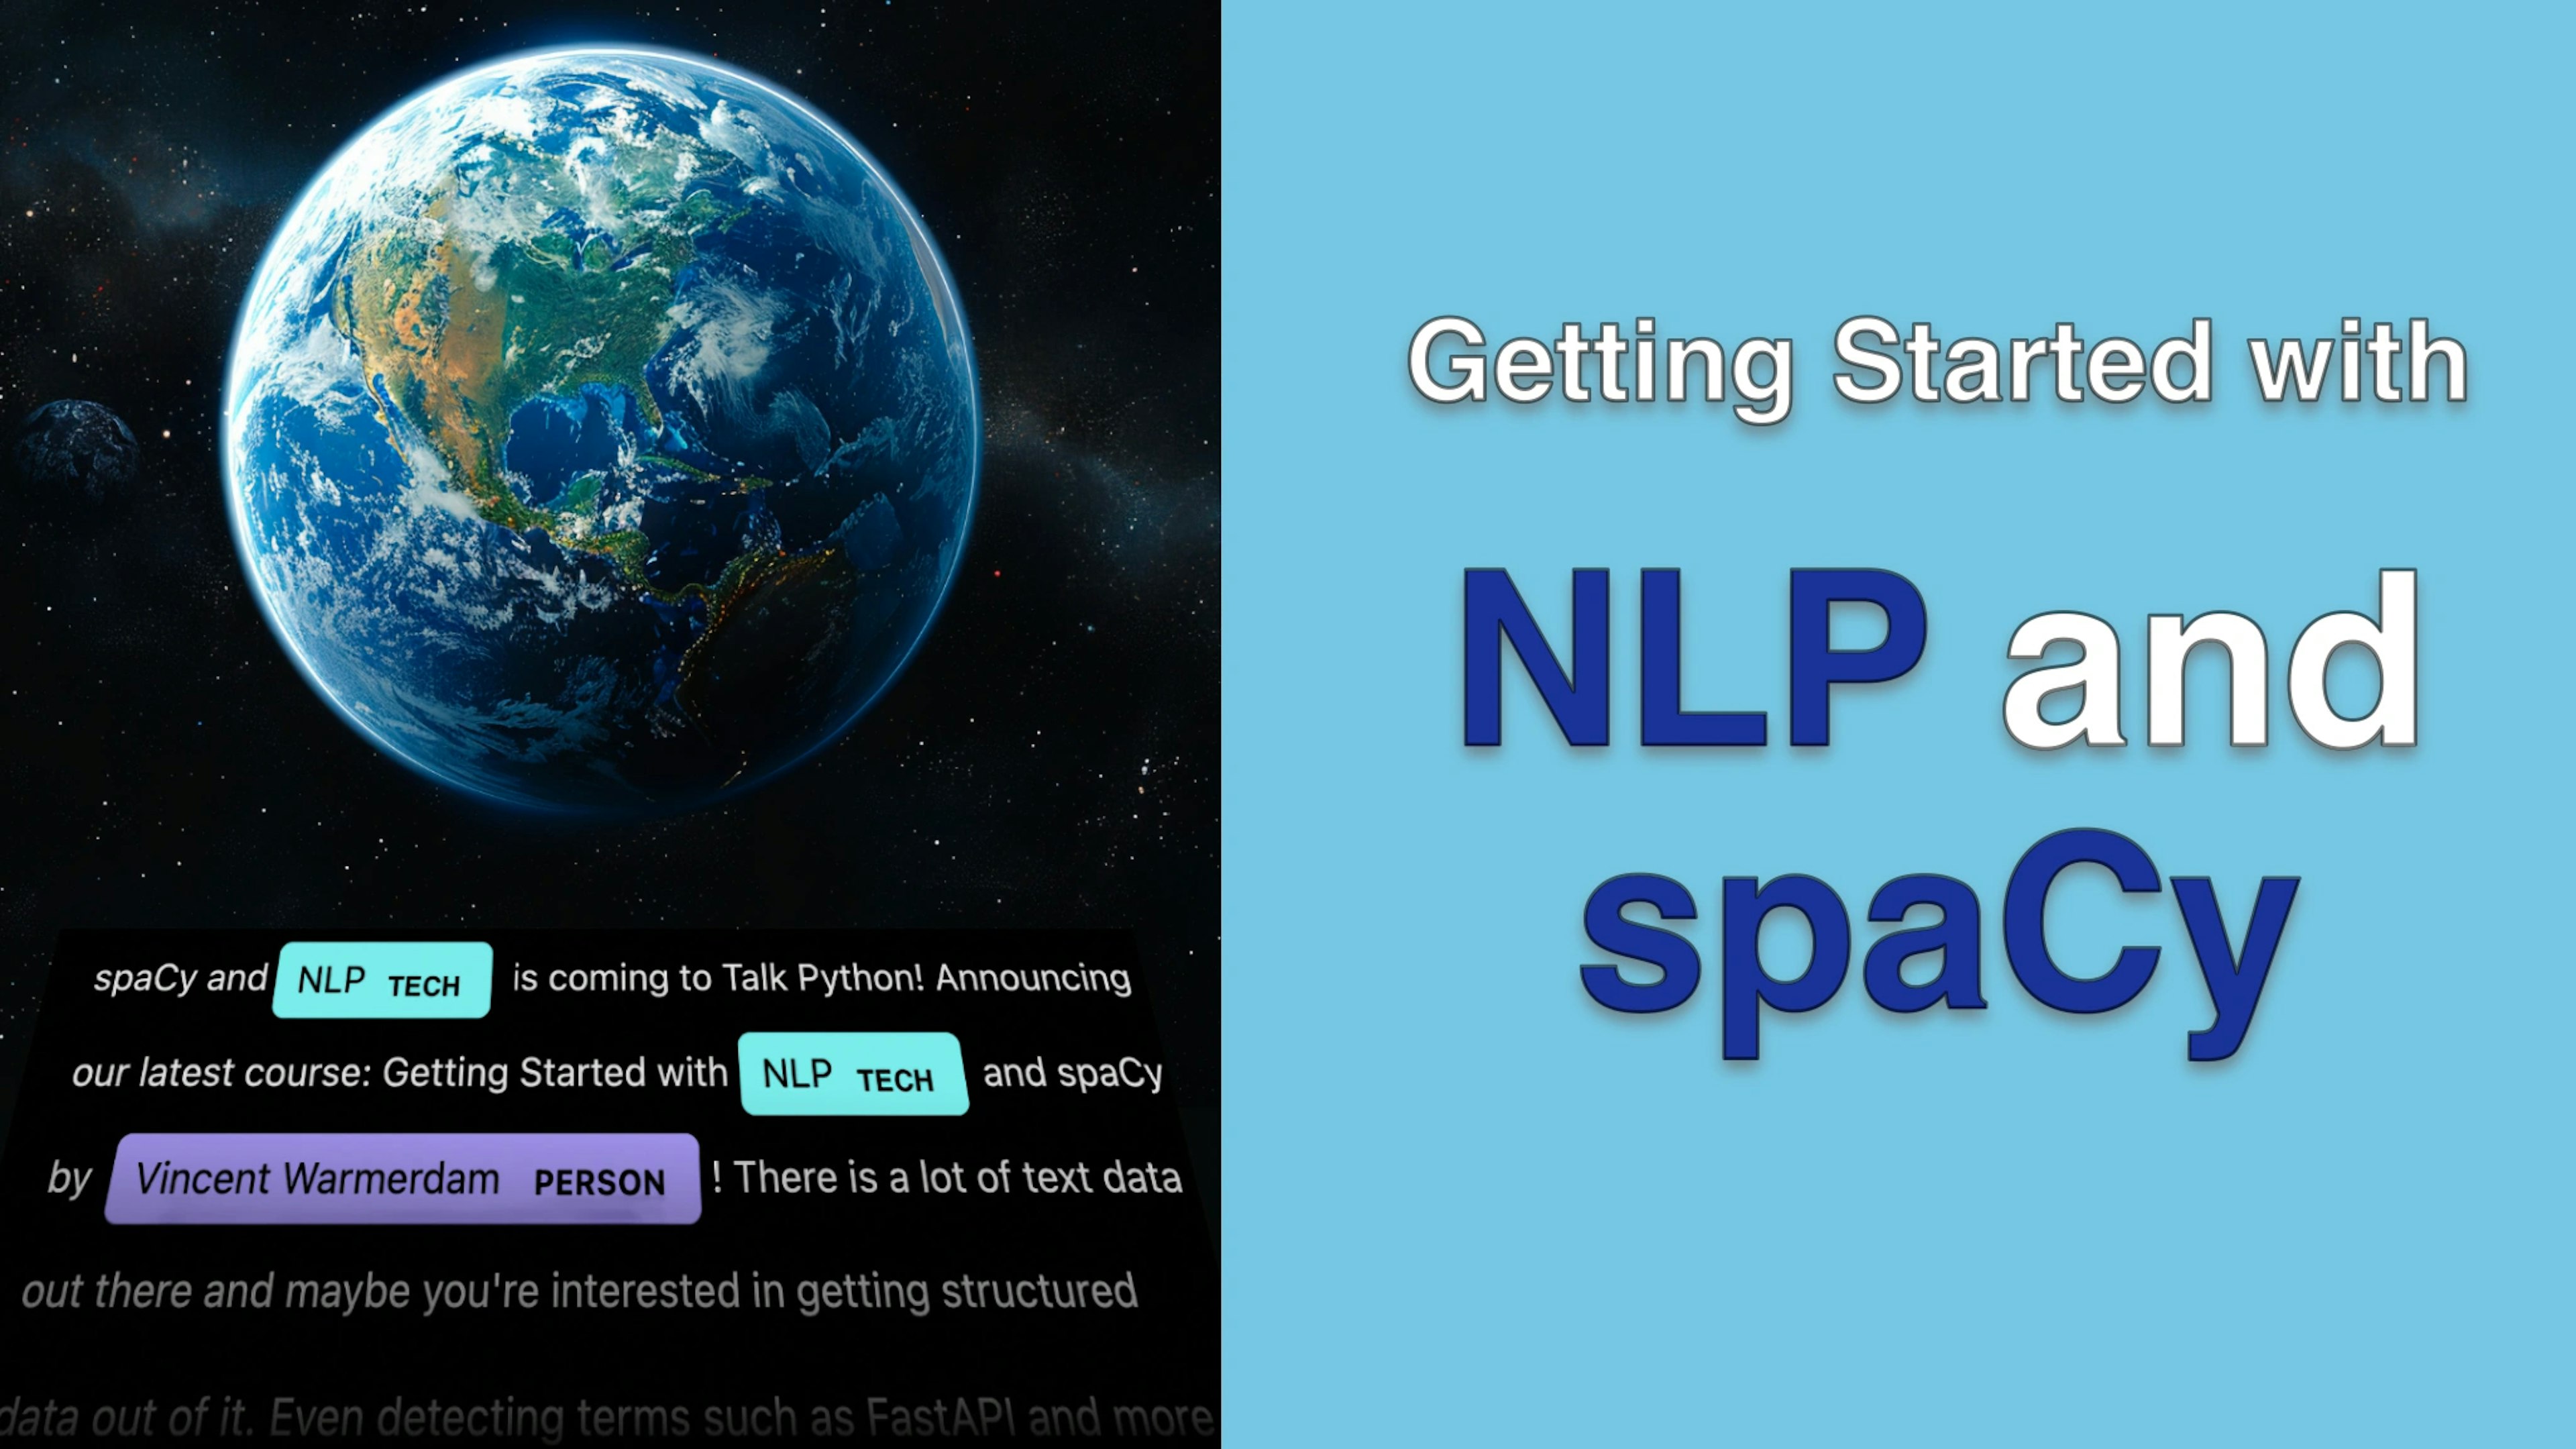 Getting Started with NLP and spaCy